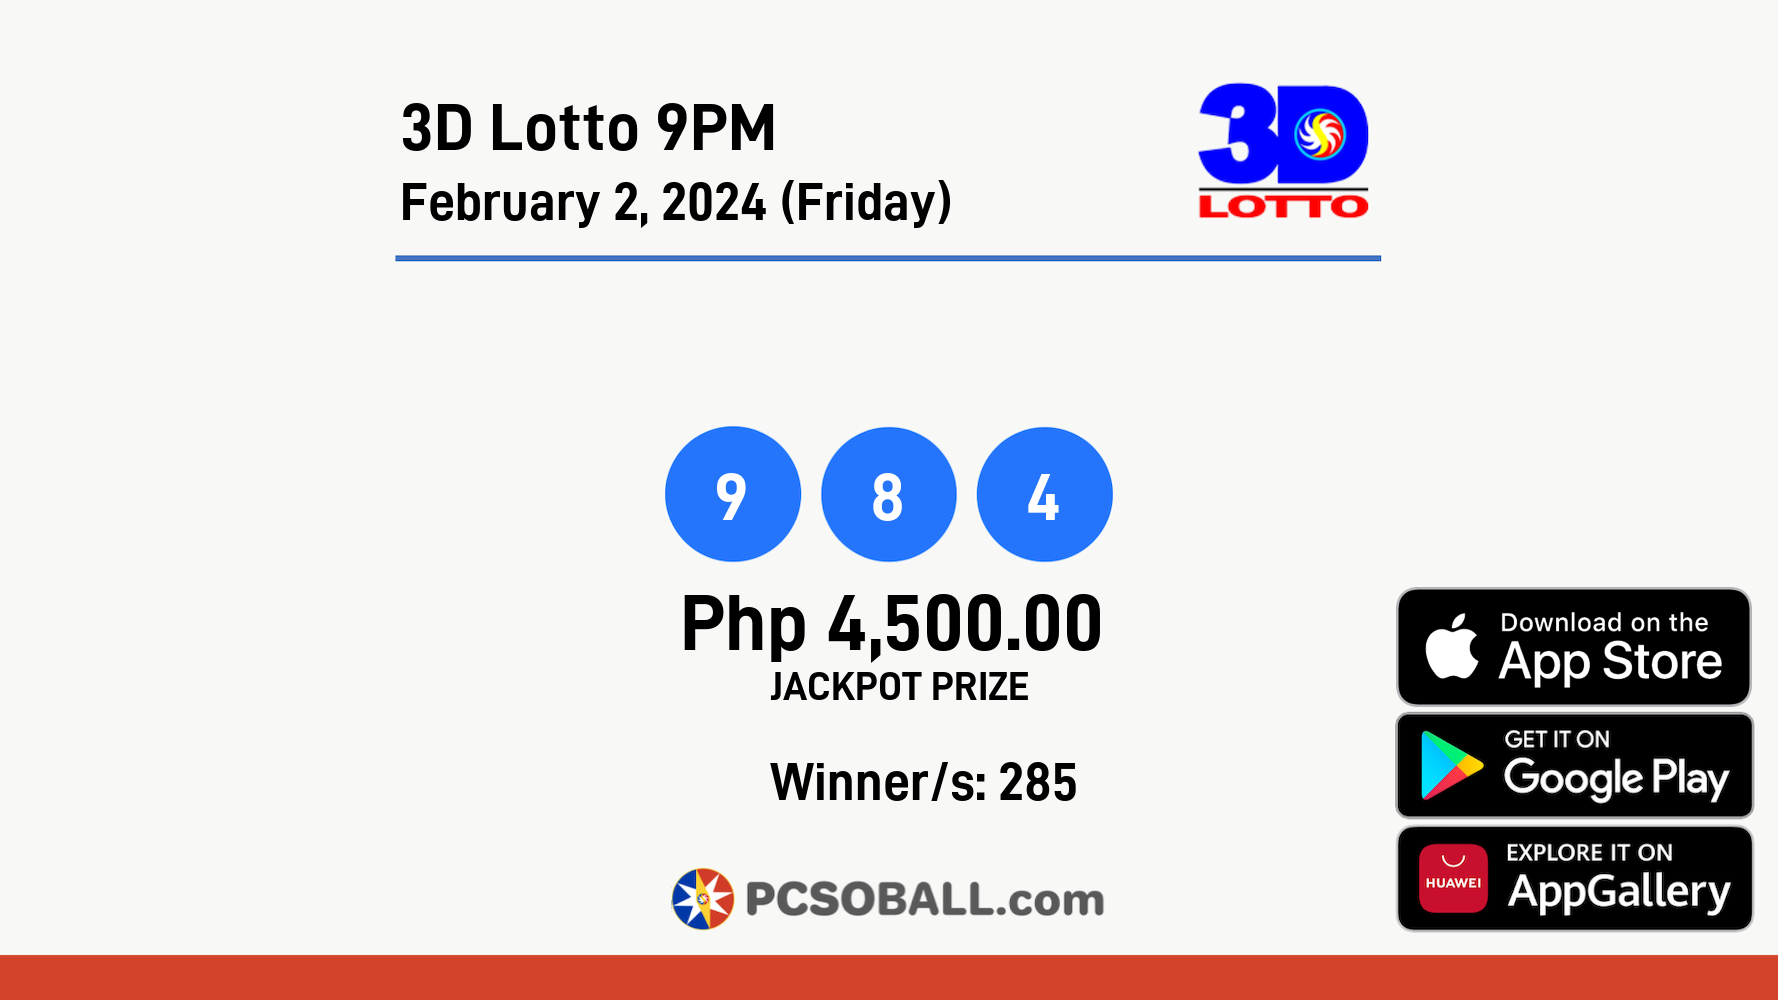 3D Lotto 9PM February 2, 2024 (Friday) Result